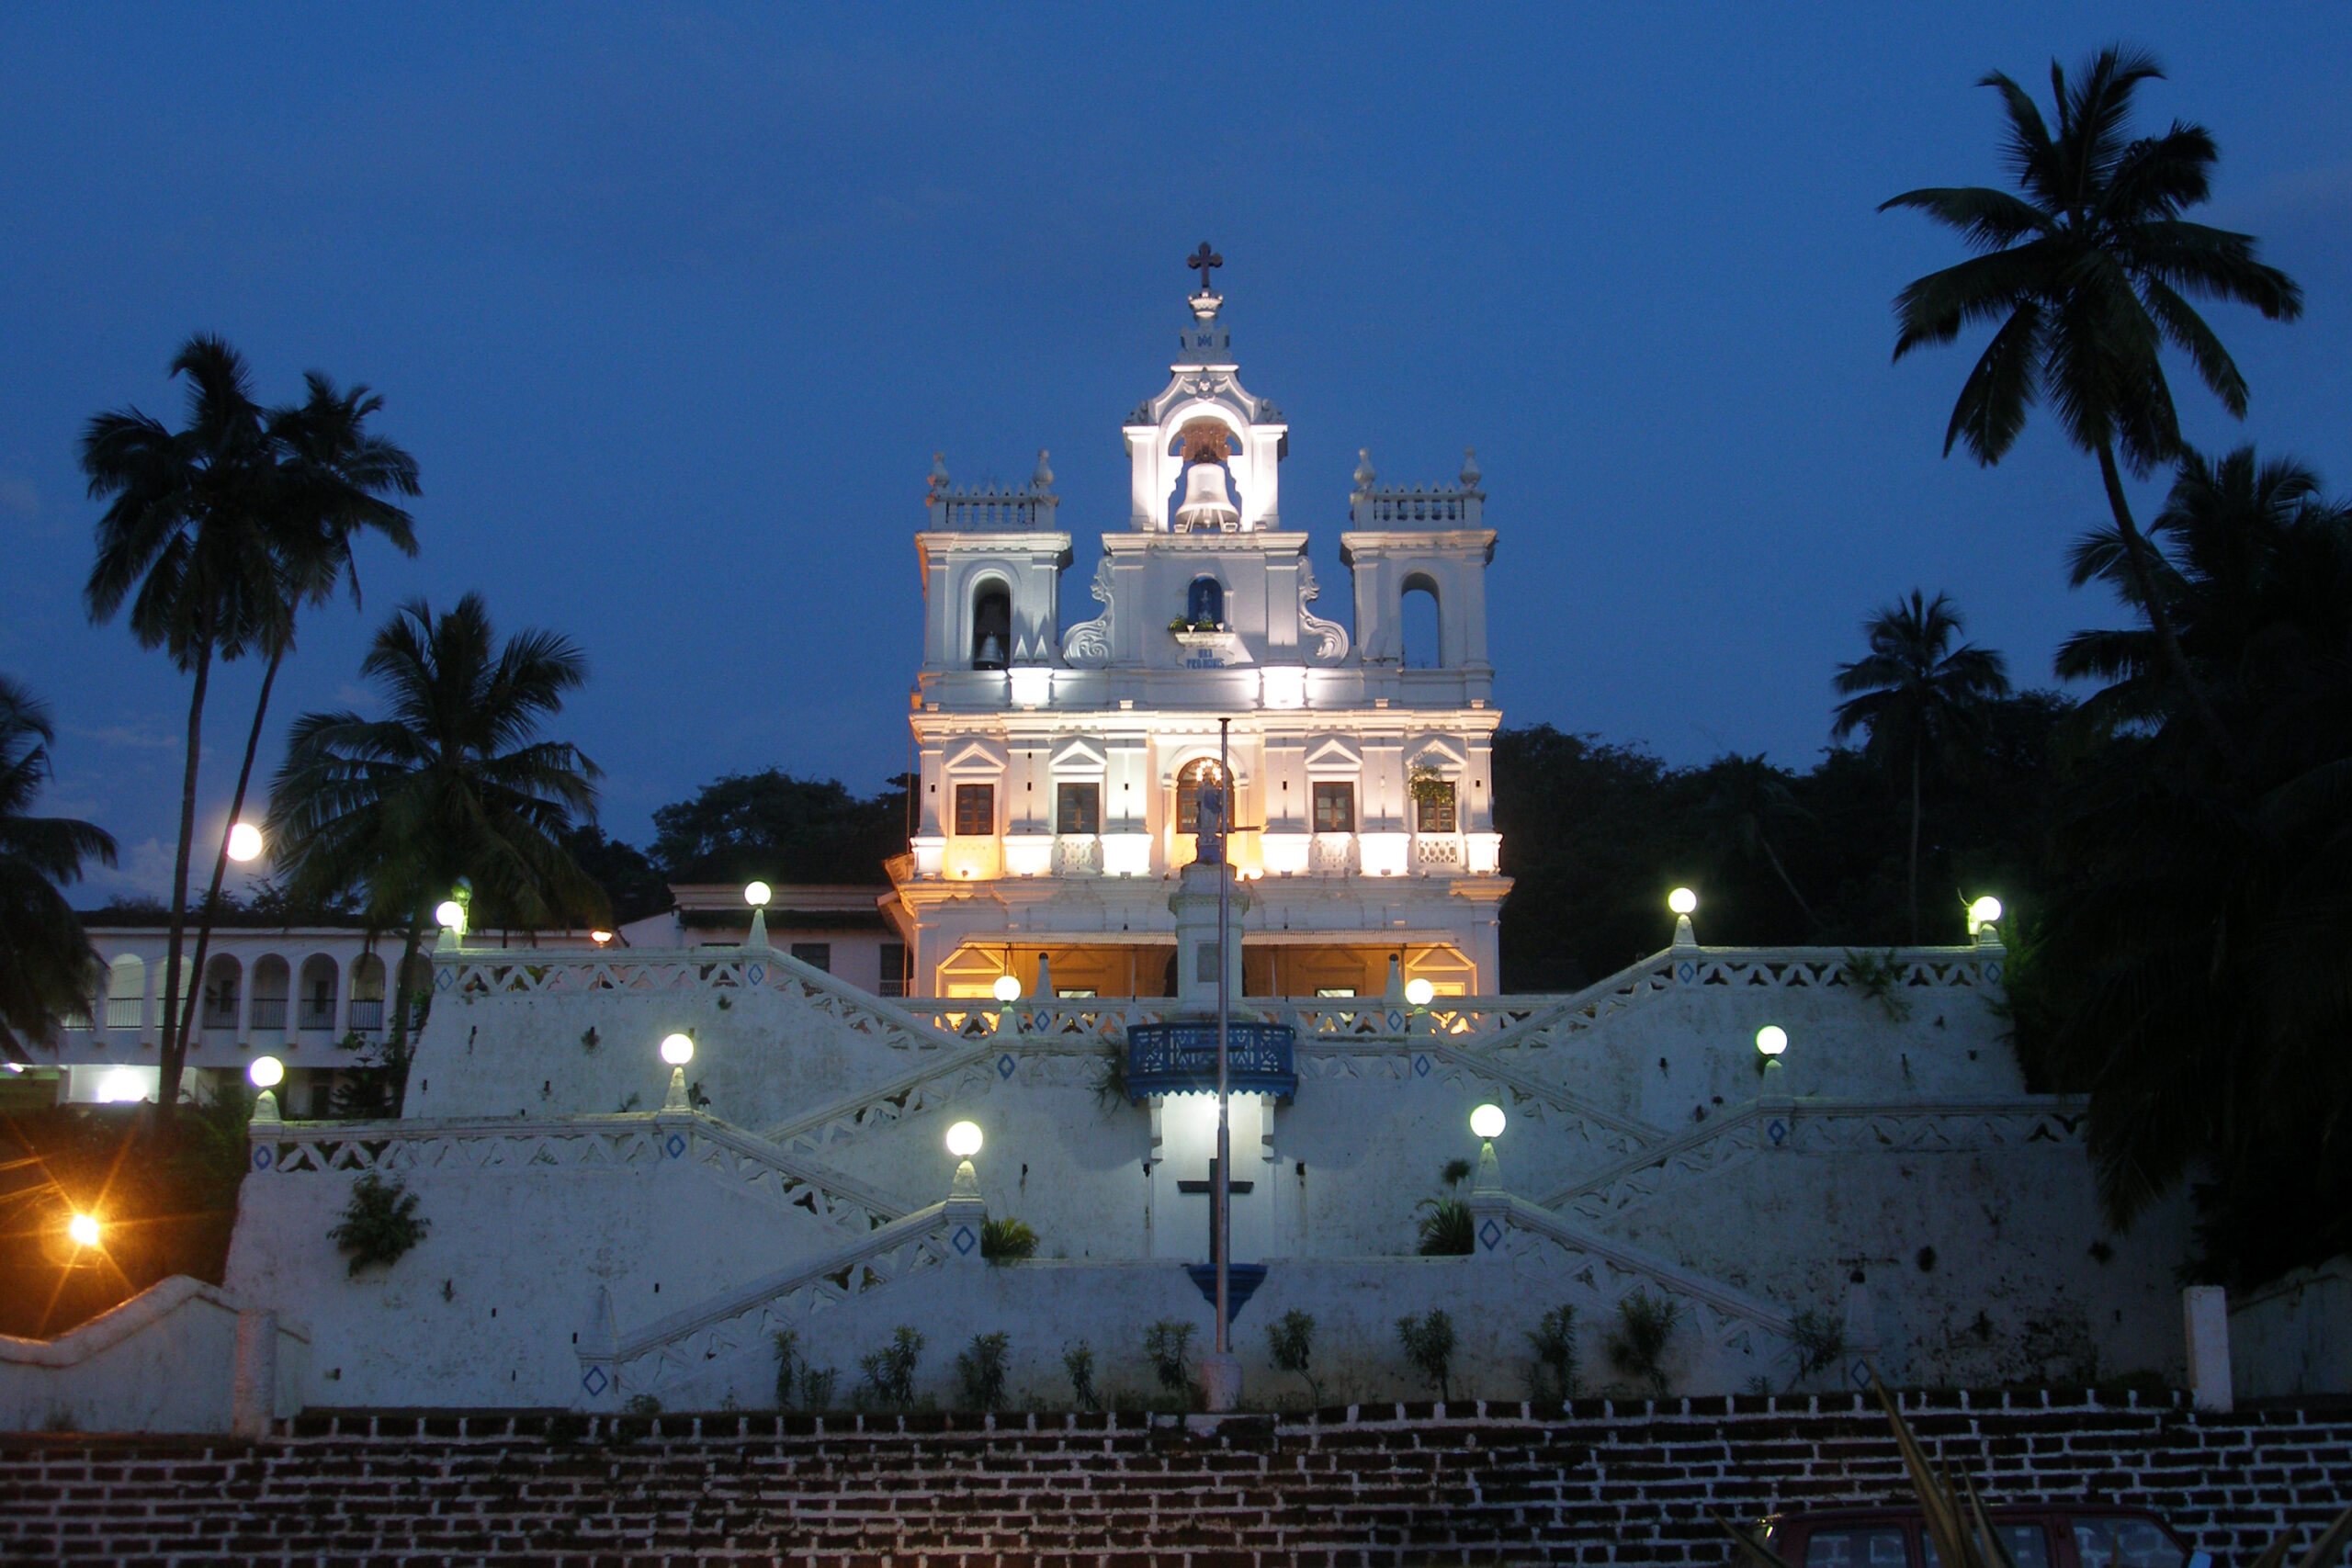 Panaji_Goa_India_Our_Lady_of_the_Immaculate_Conception_Church_at_night-scaled.jpg